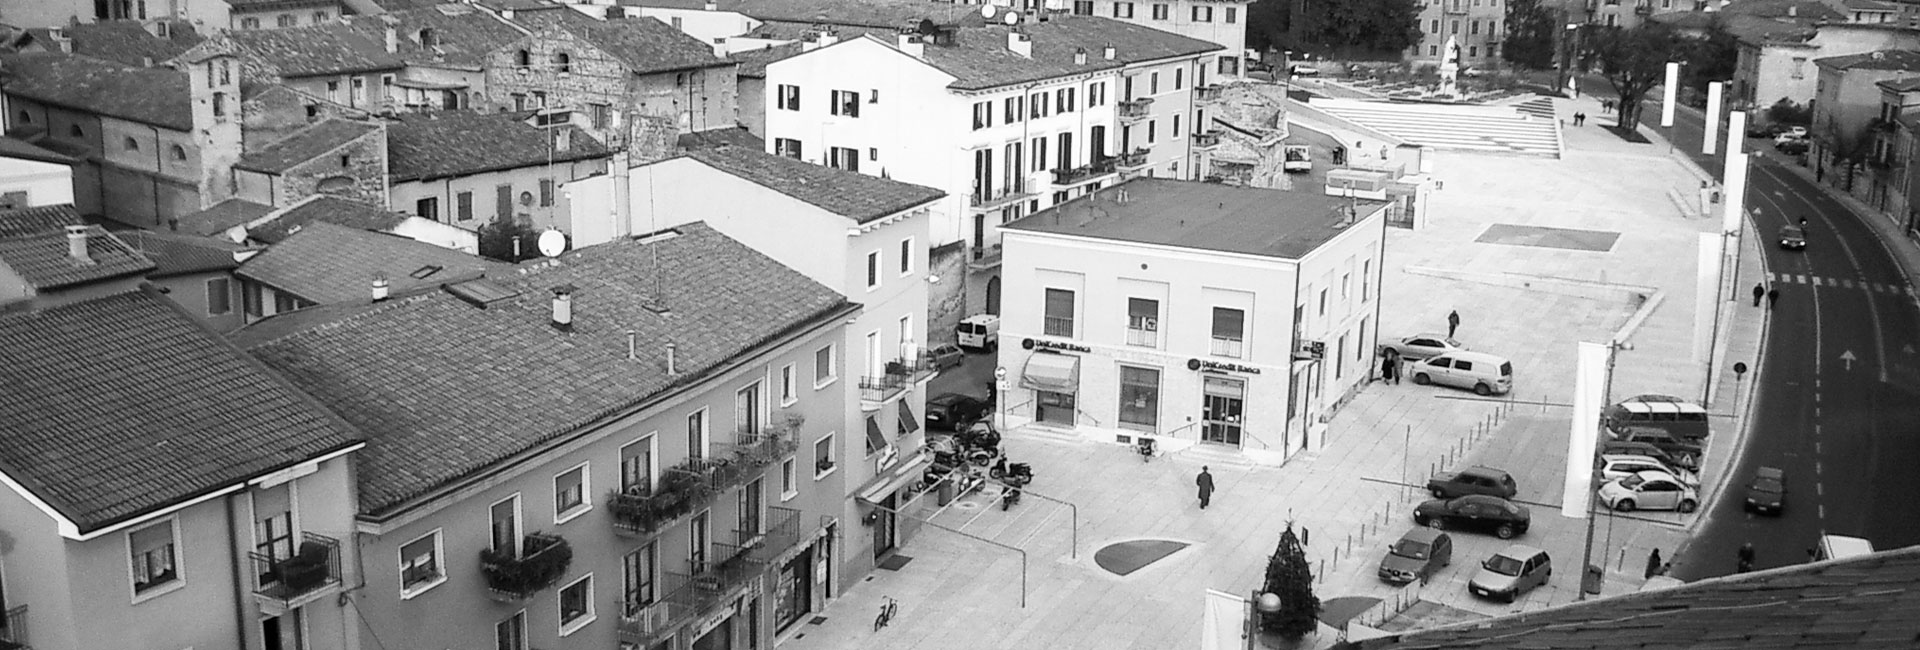 piazza_isolo01